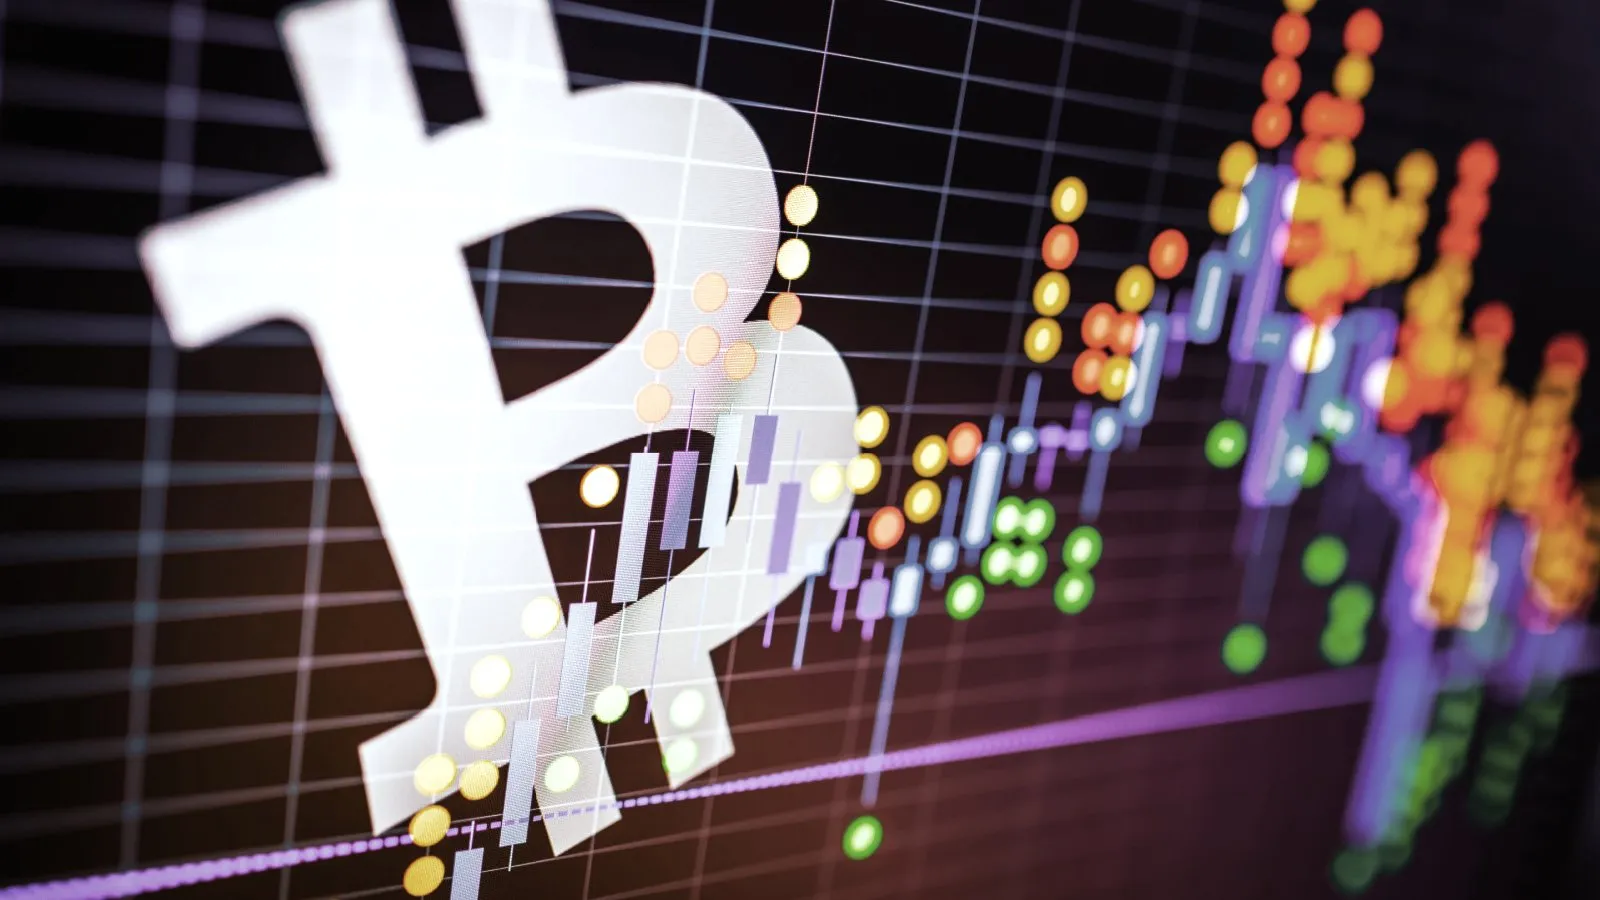 Is Bitcoin poised for another bull run? Image: Shutterstock